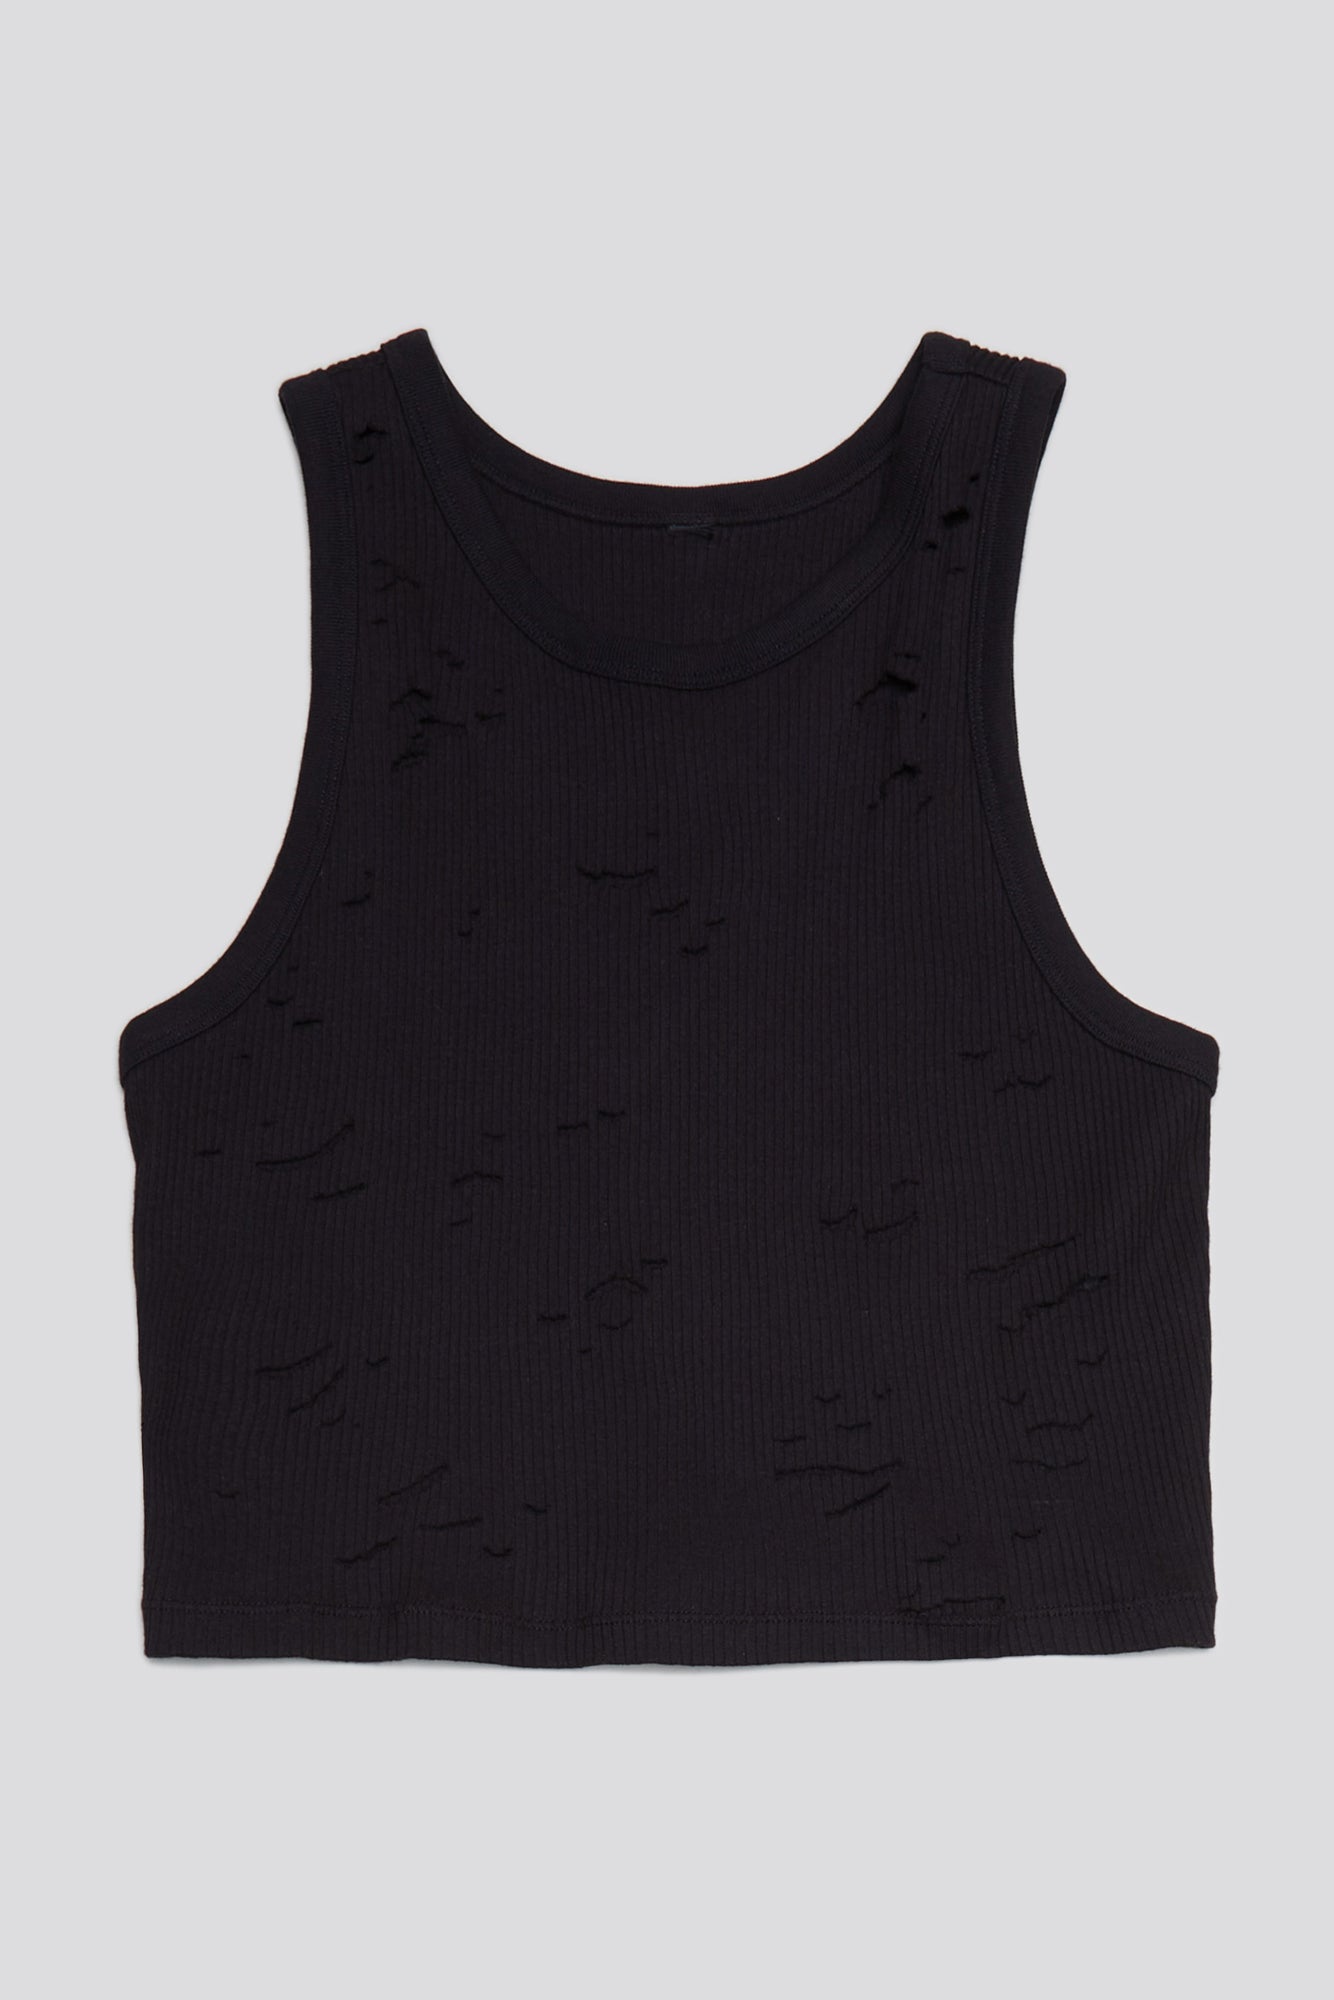 Women Black Tank Tops at Rs 140/piece